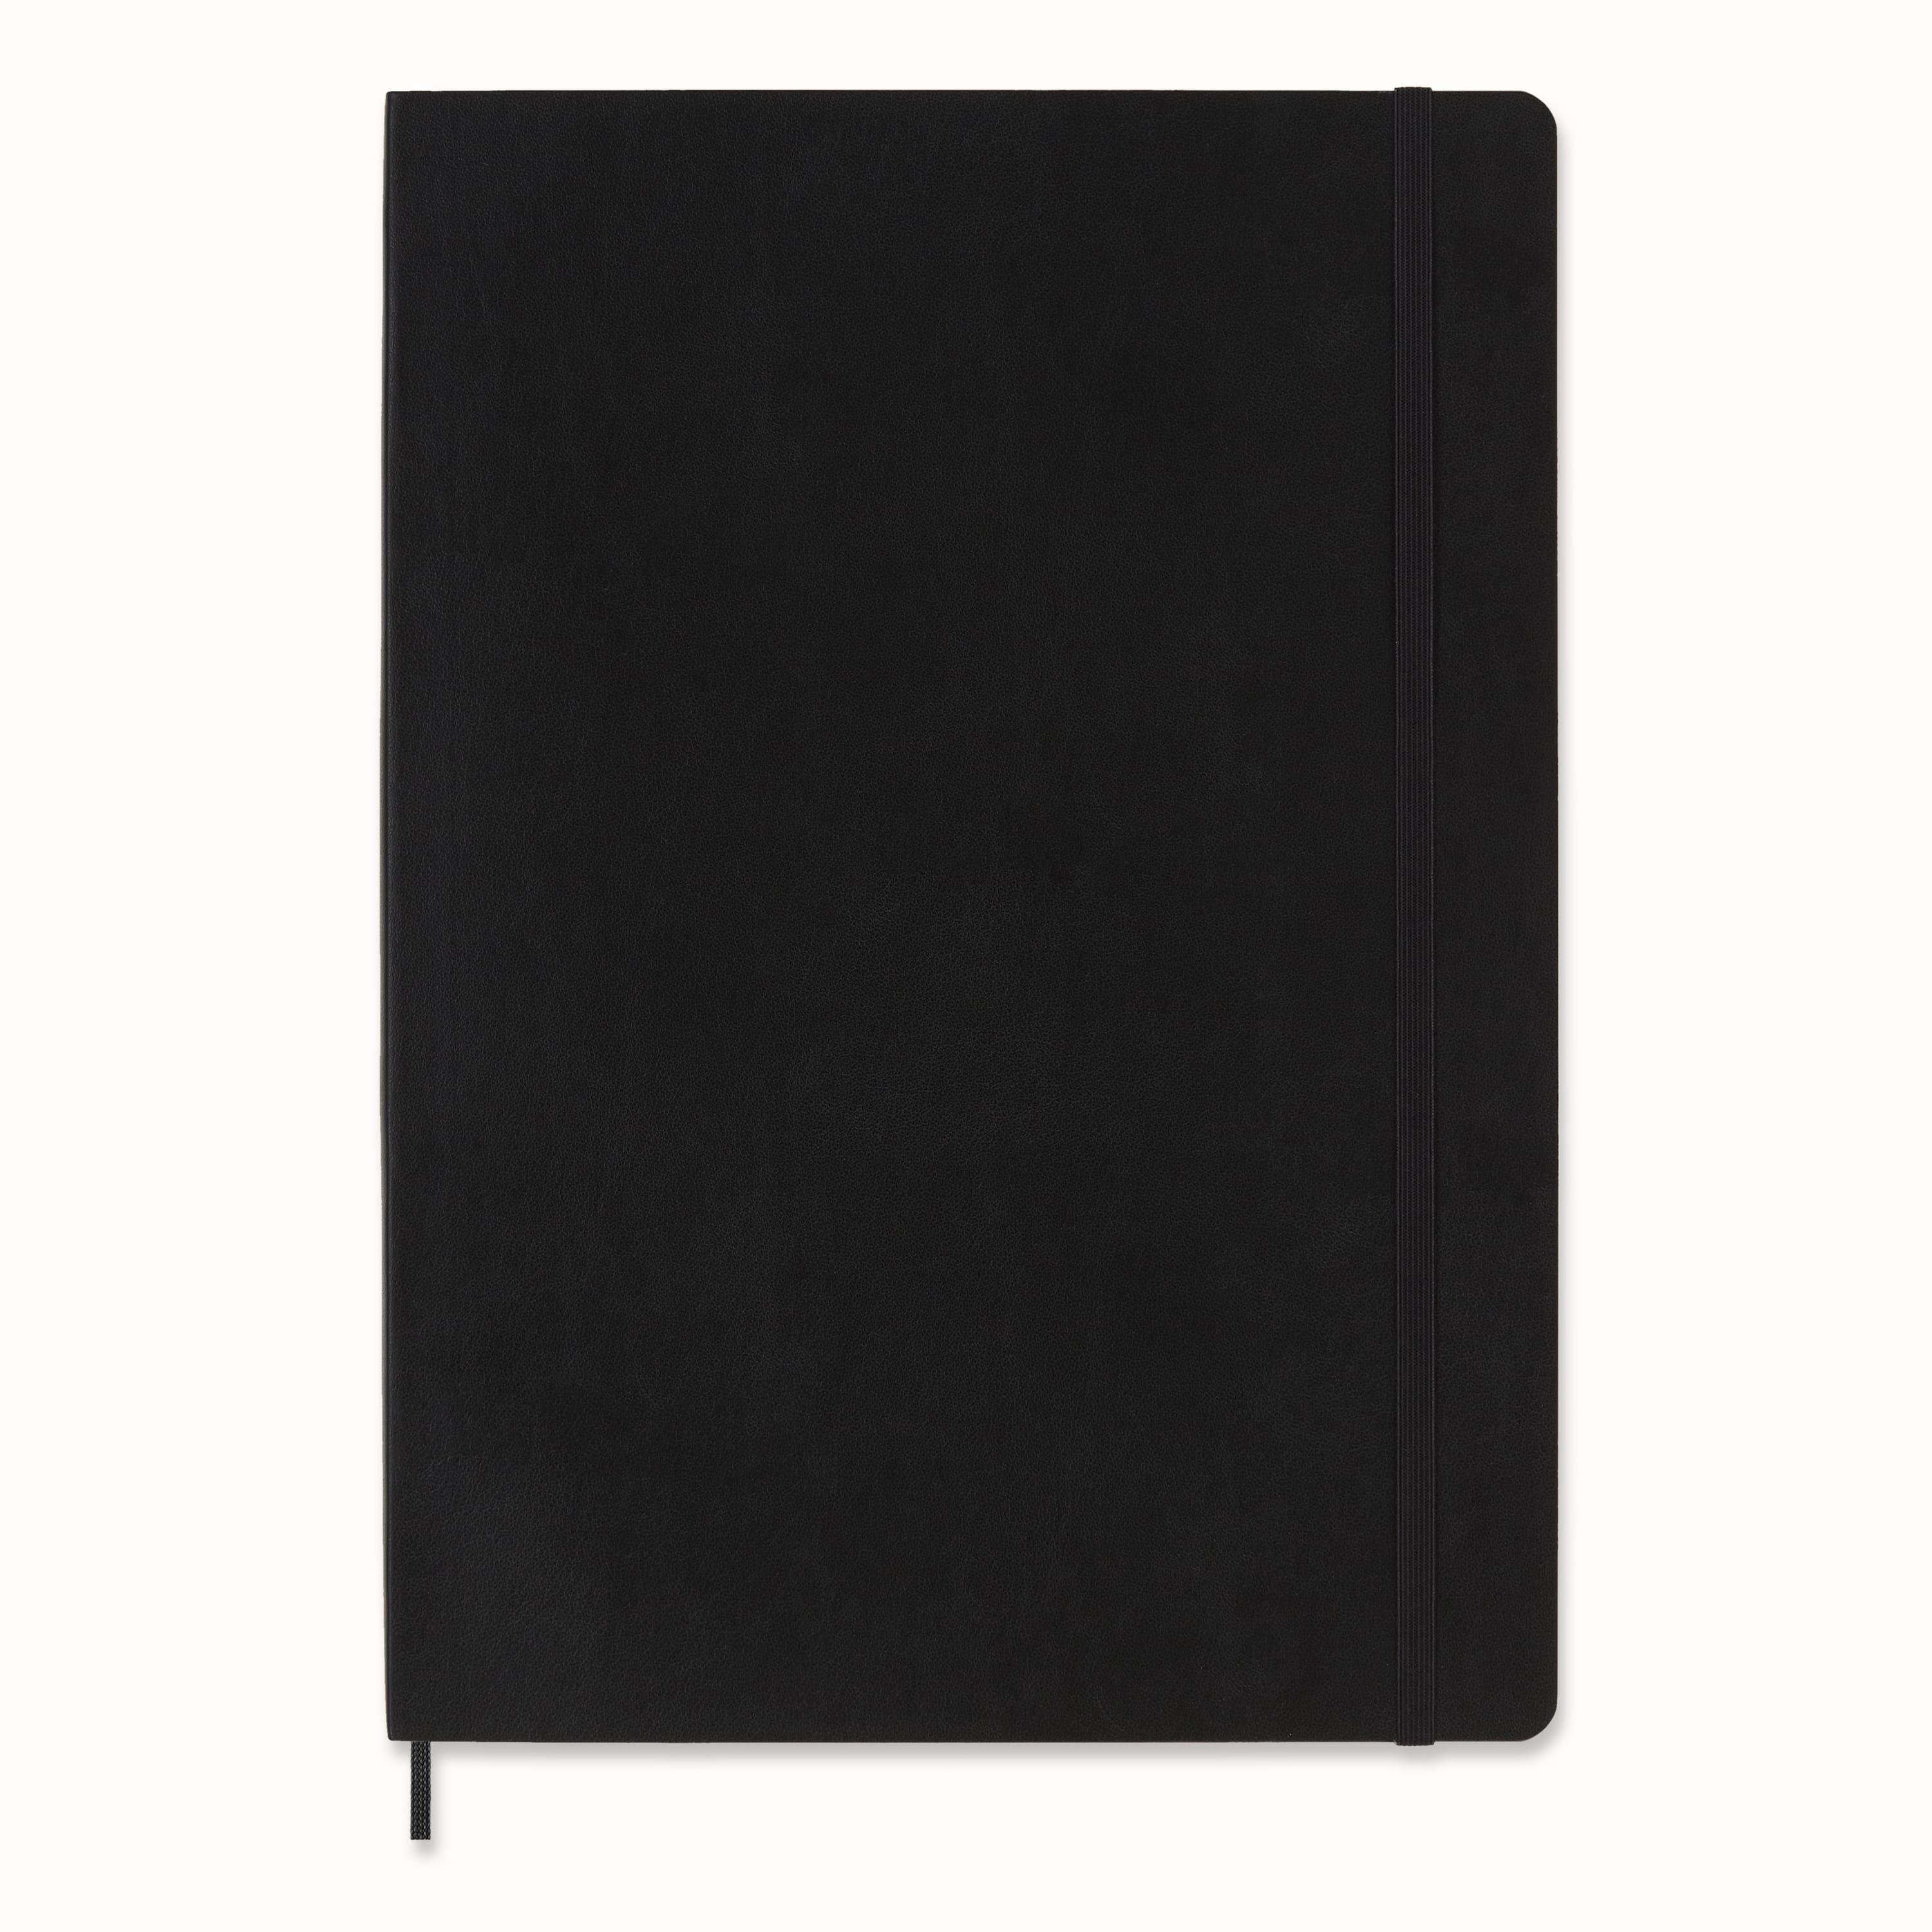 Notebook with Soft Cover and Elastic Closure Moleskine Dimensions A4 21 x 29.7 cm Notebook Classic Squared Notebook Colour Black 192 Pages